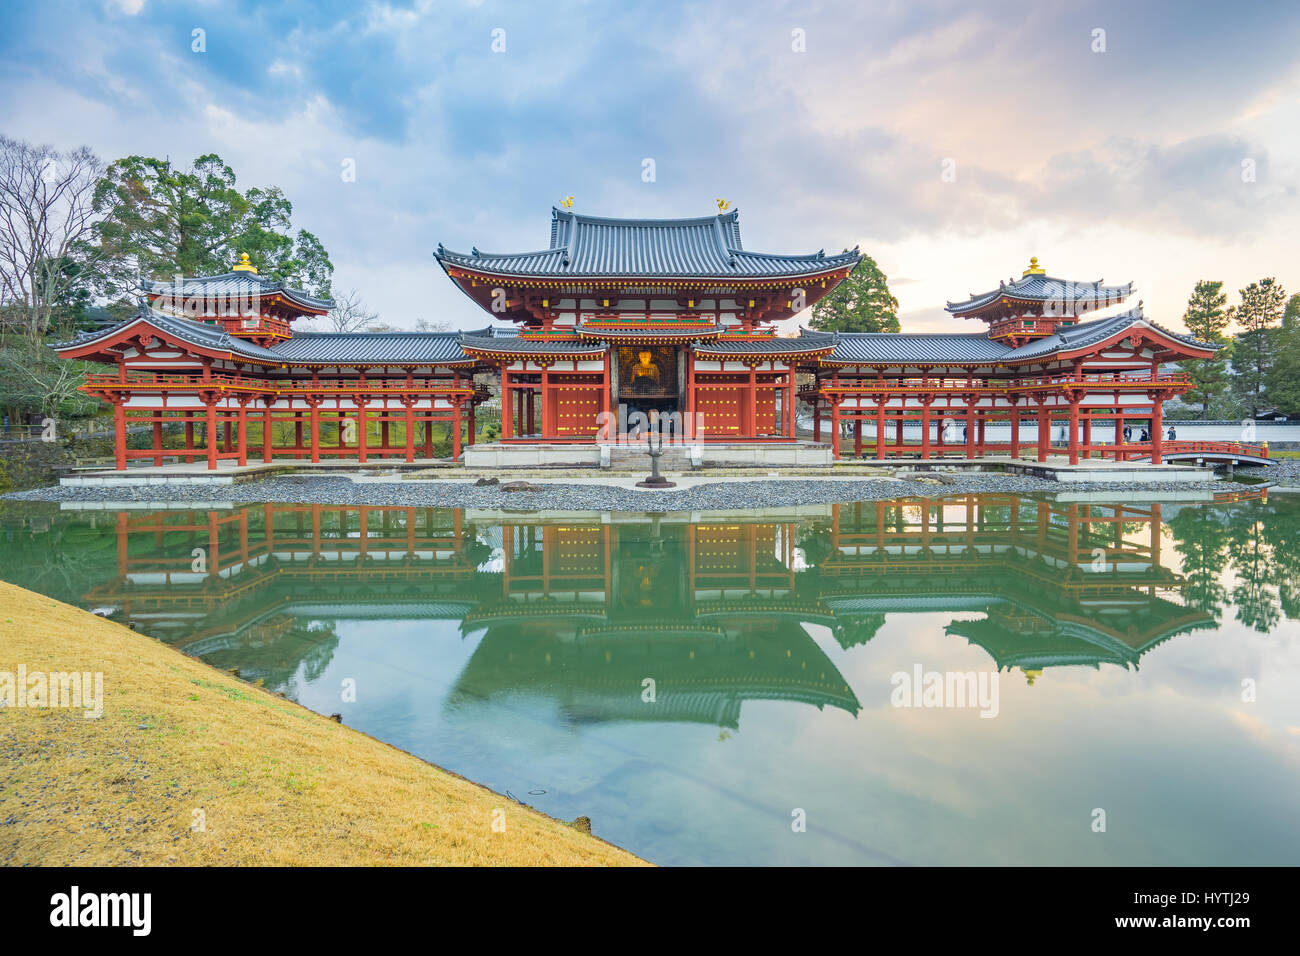 Kyoto, Japan - December 31, 2015: Byodo-in is a Buddhist temple in the city of Uji in Kyoto Prefecture, Japan. It is jointly a temple of the Jodo-shu  Stock Photo